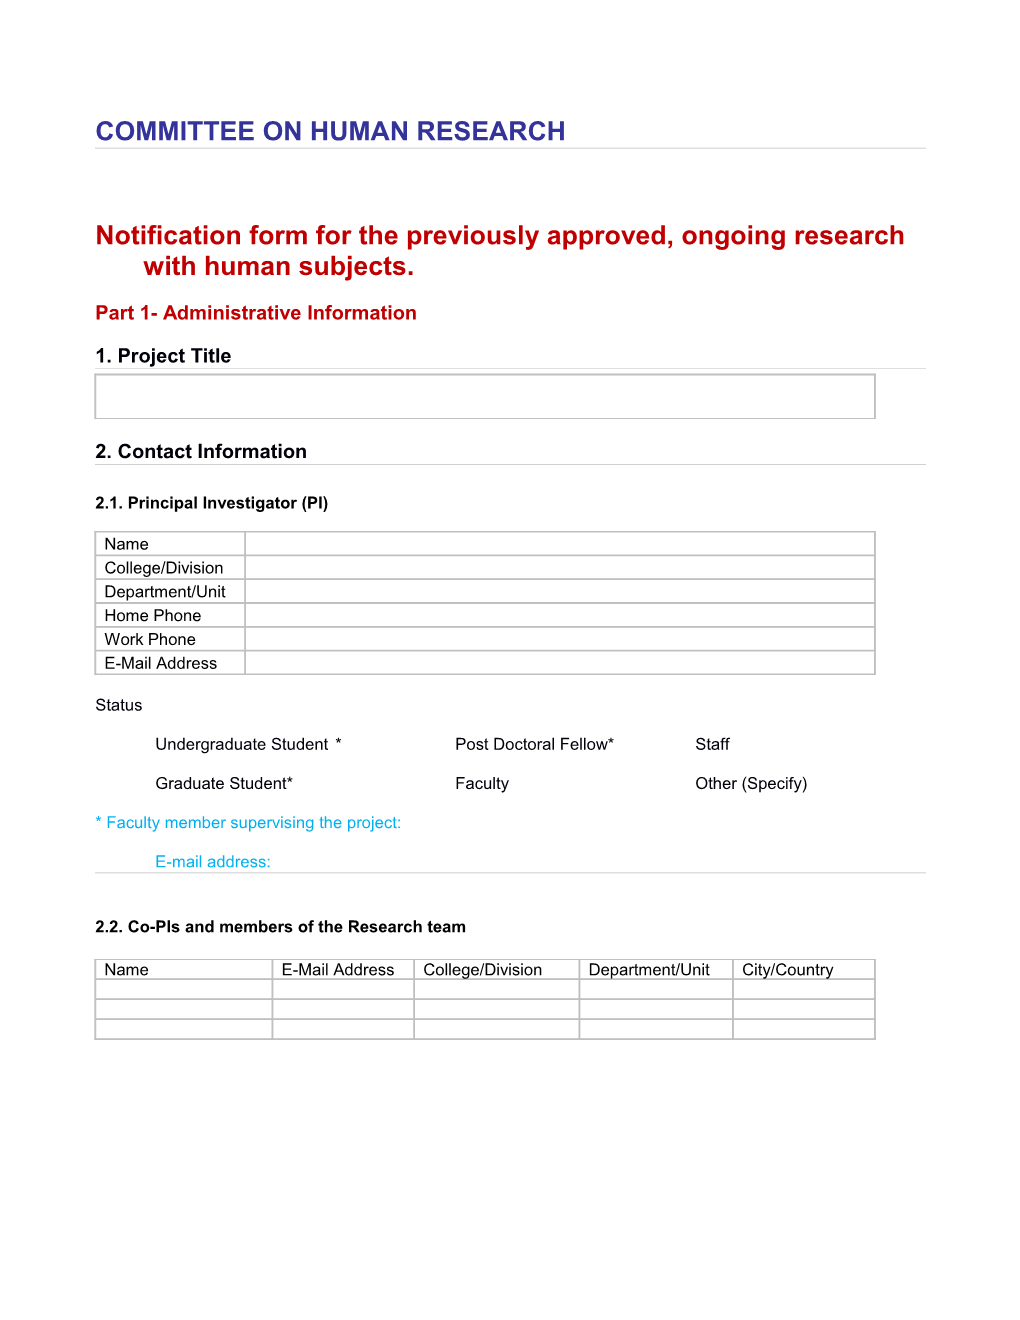 Notification Form for the Previously Approved, Ongoing Research with Human Subjects